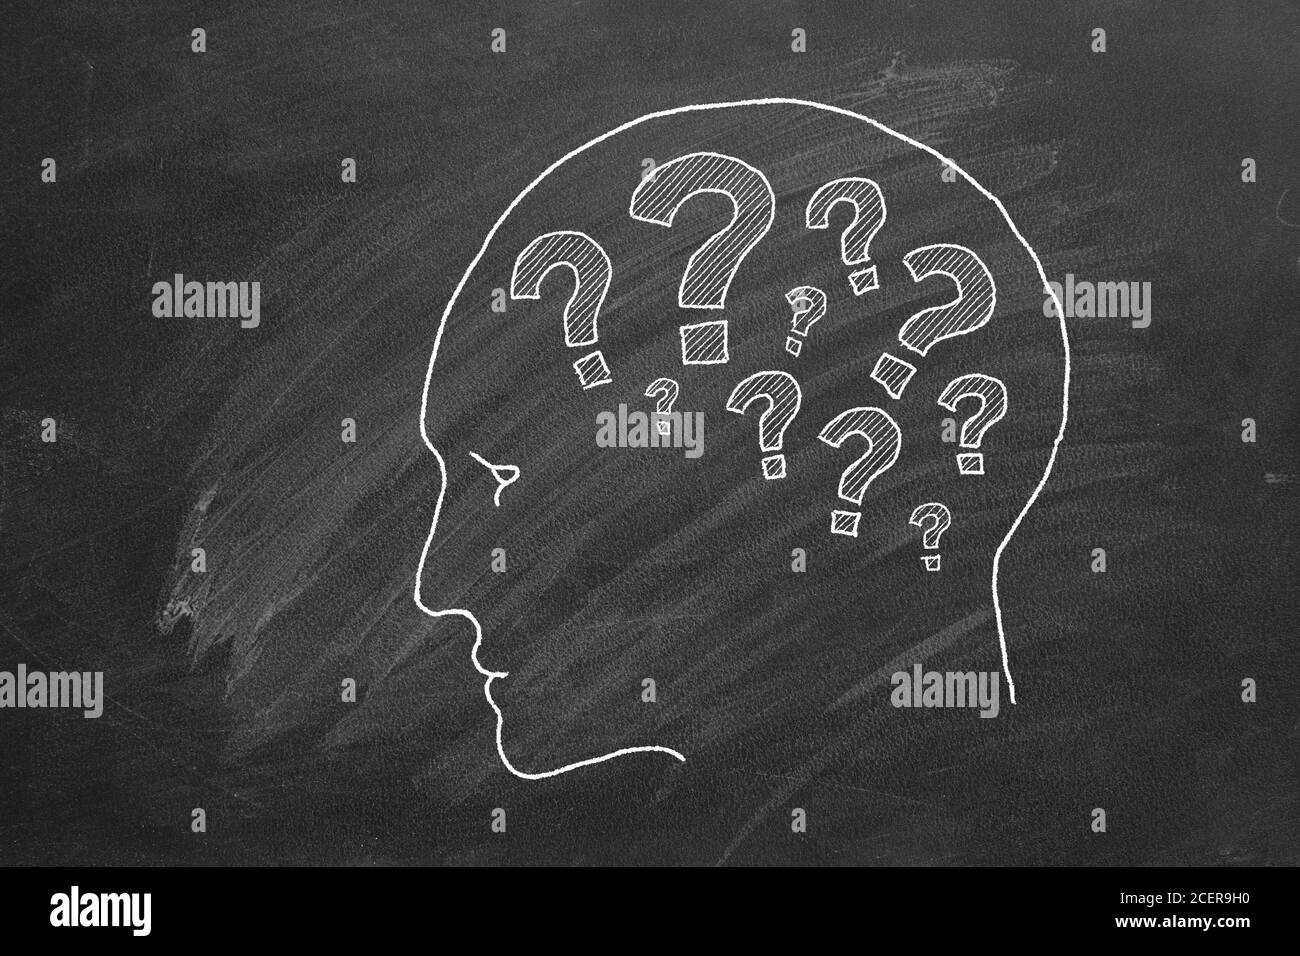 Human head with question marks inside. Animated Illustration on blackboard. Stock Photo